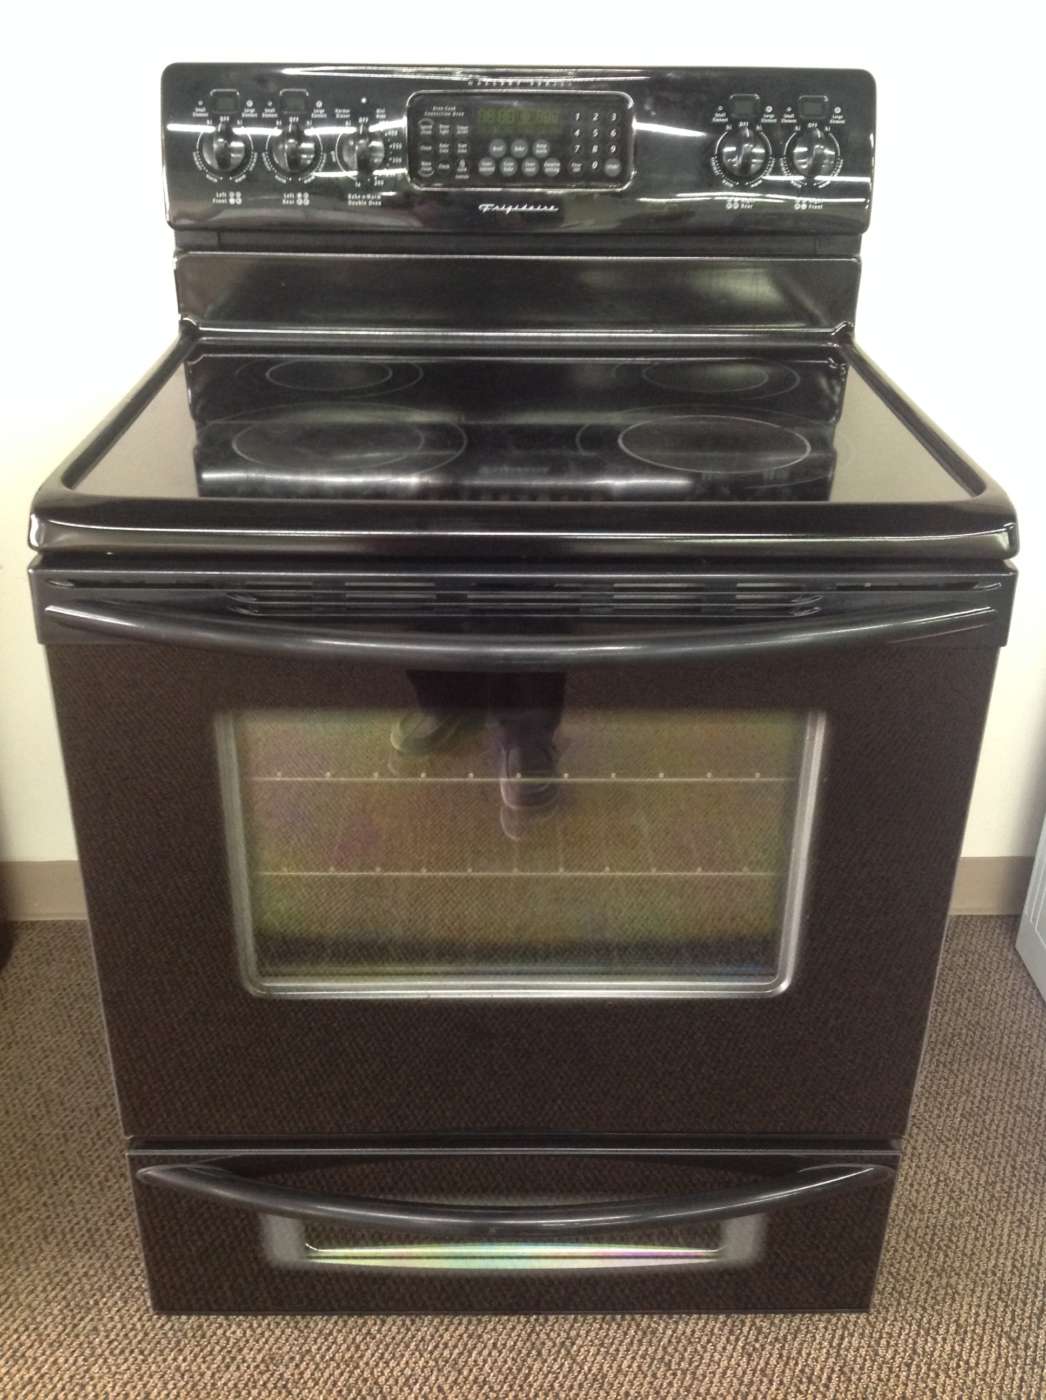 Used FRIGIDAIRE Self-Clean Convection-Oven Range With Bake & Warm Drawer – Black